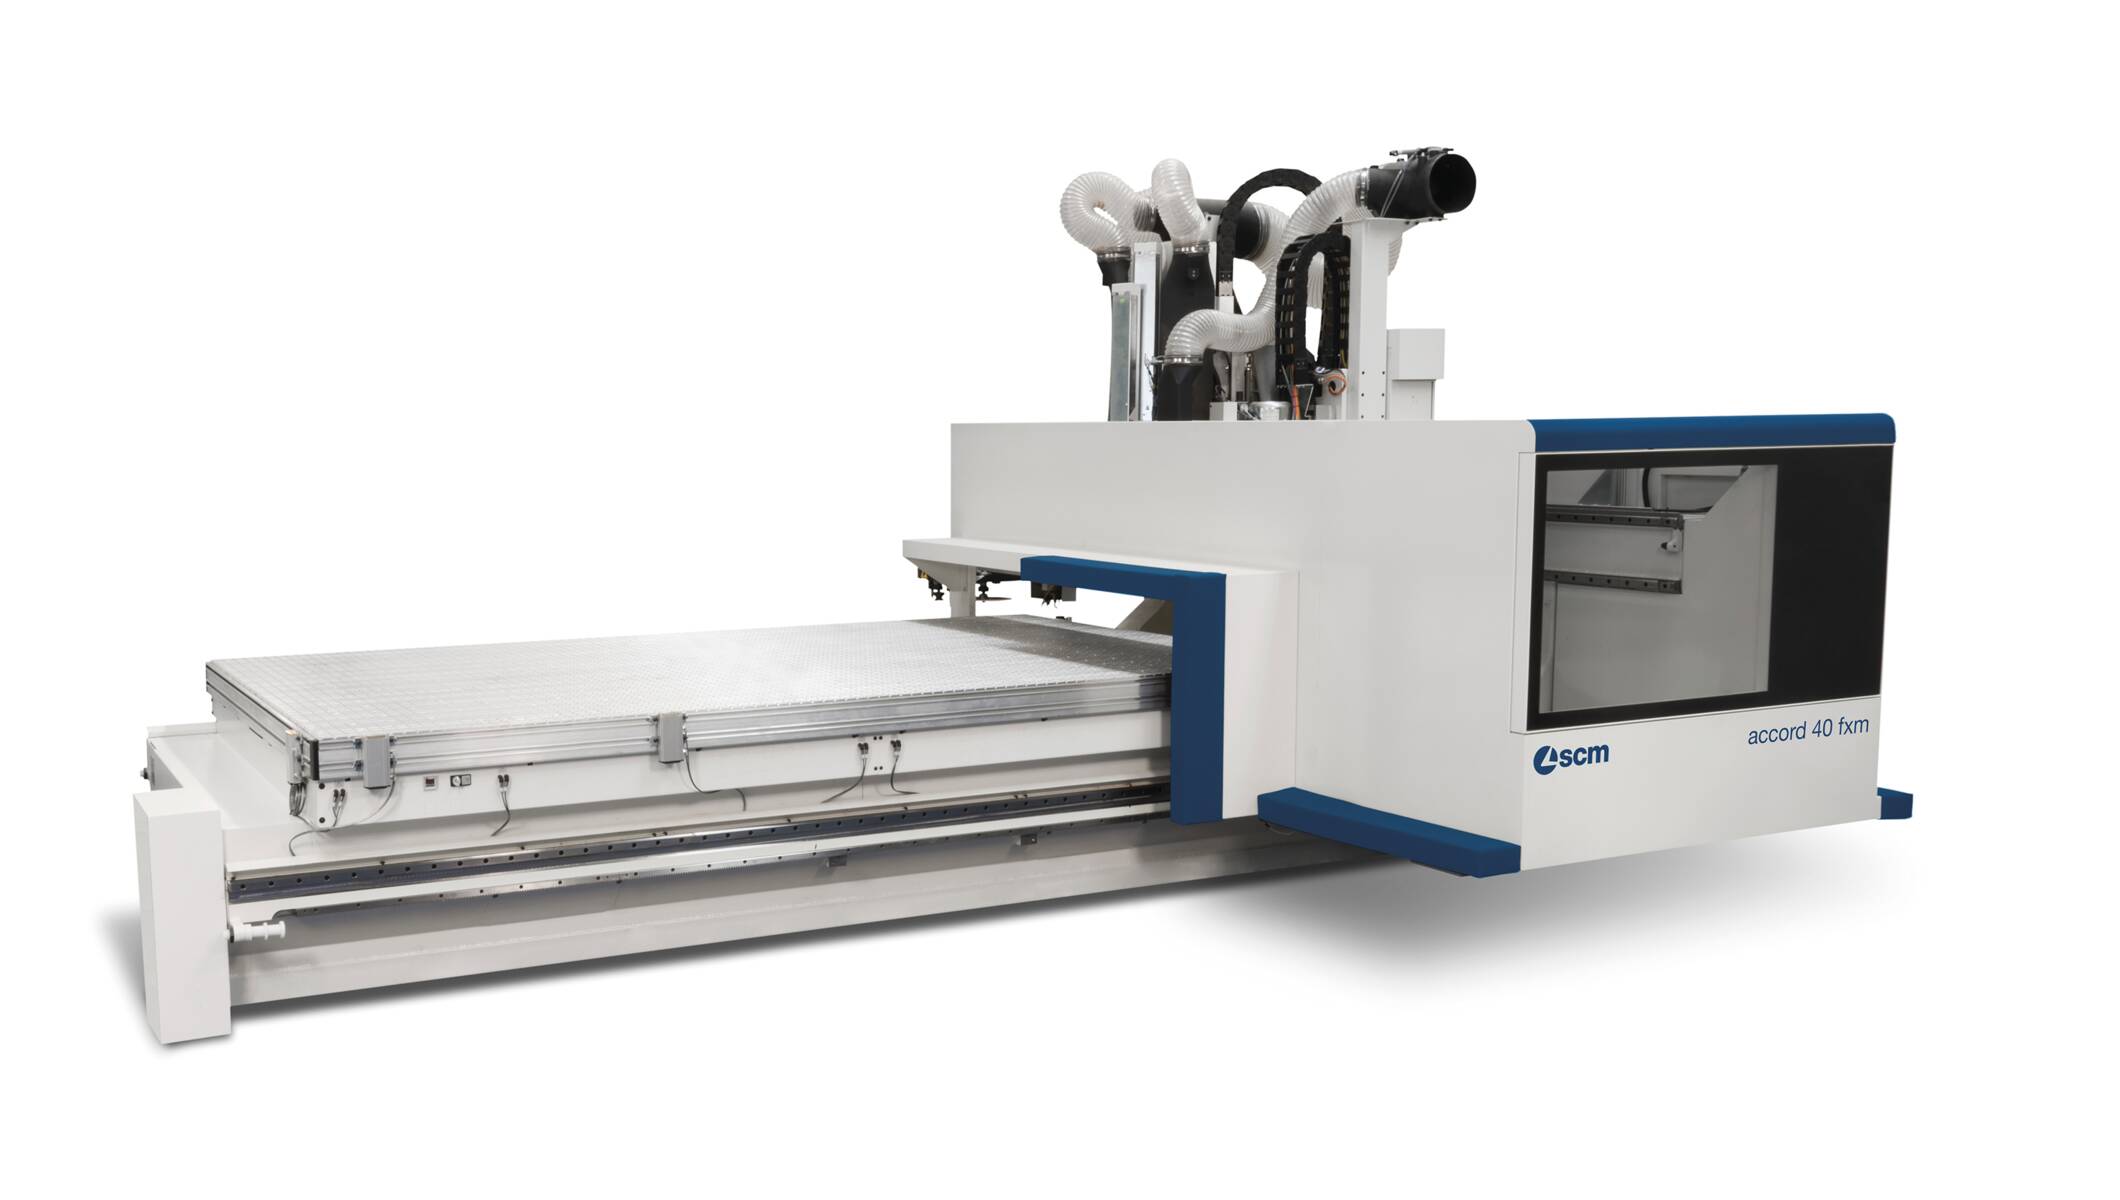 CNC Machining Centers - CNC Nesting Machining Centers for routing and drilling - accord 40 fxm